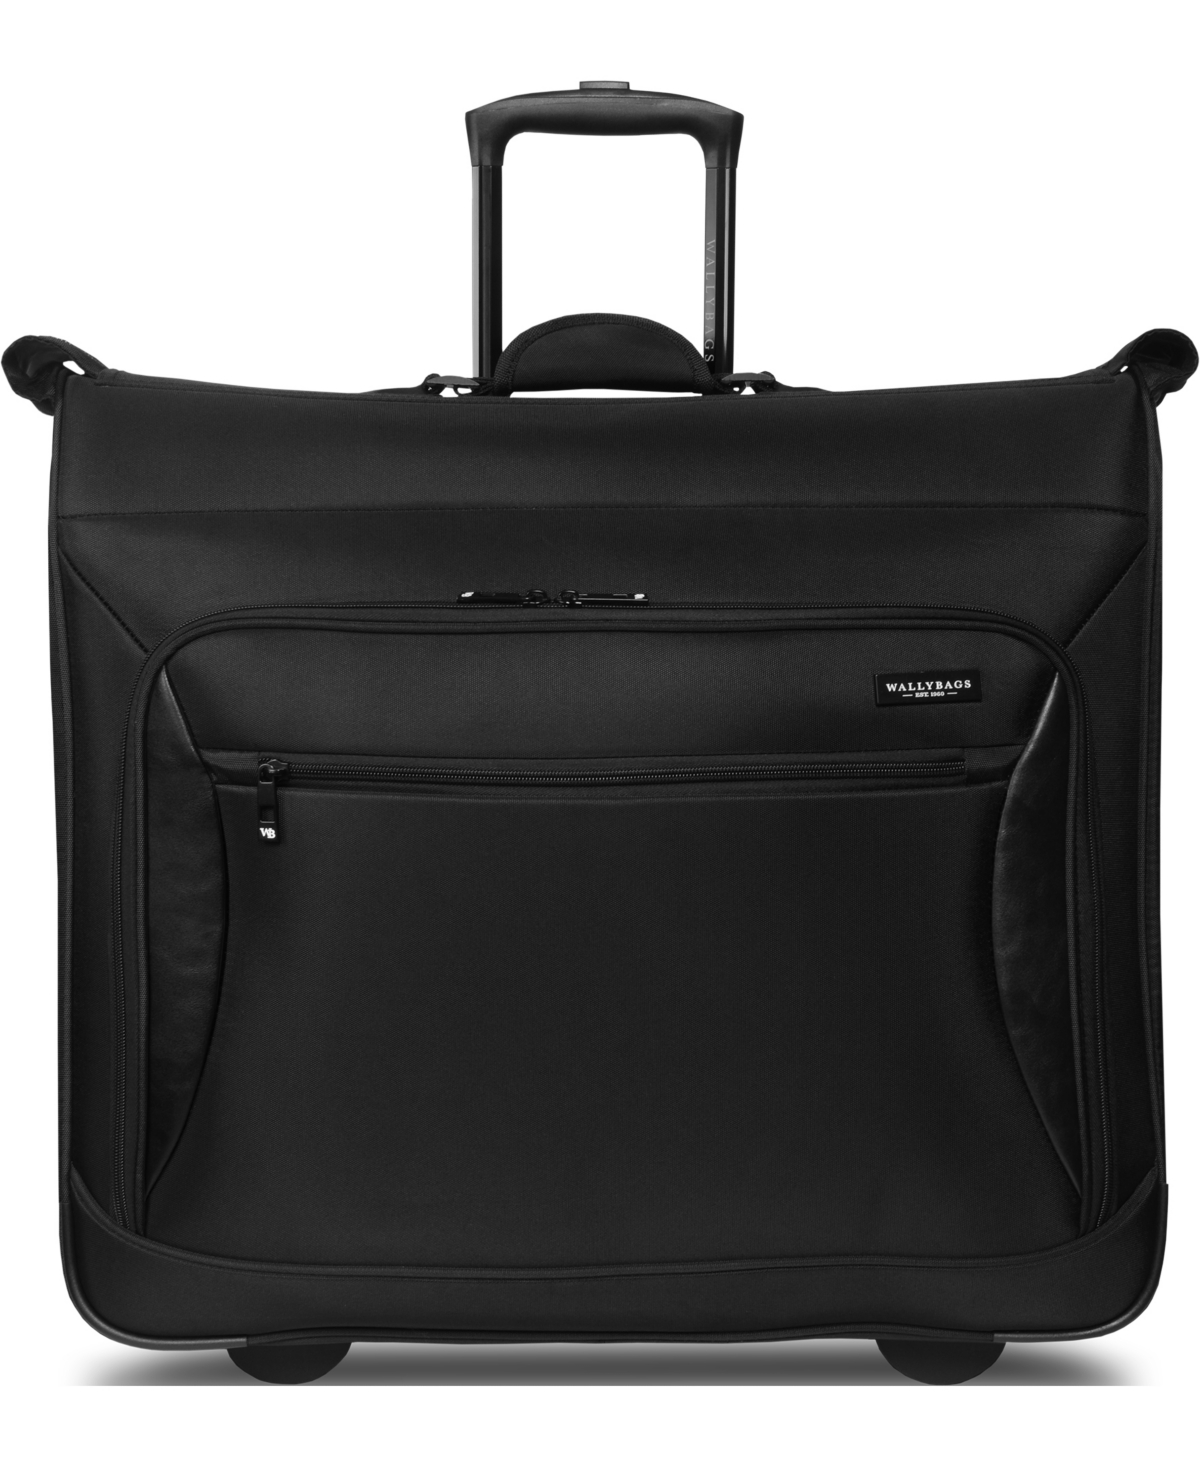 Wallybags 45" Premium Rolling Garment Bag With Multiple Pockets In Black